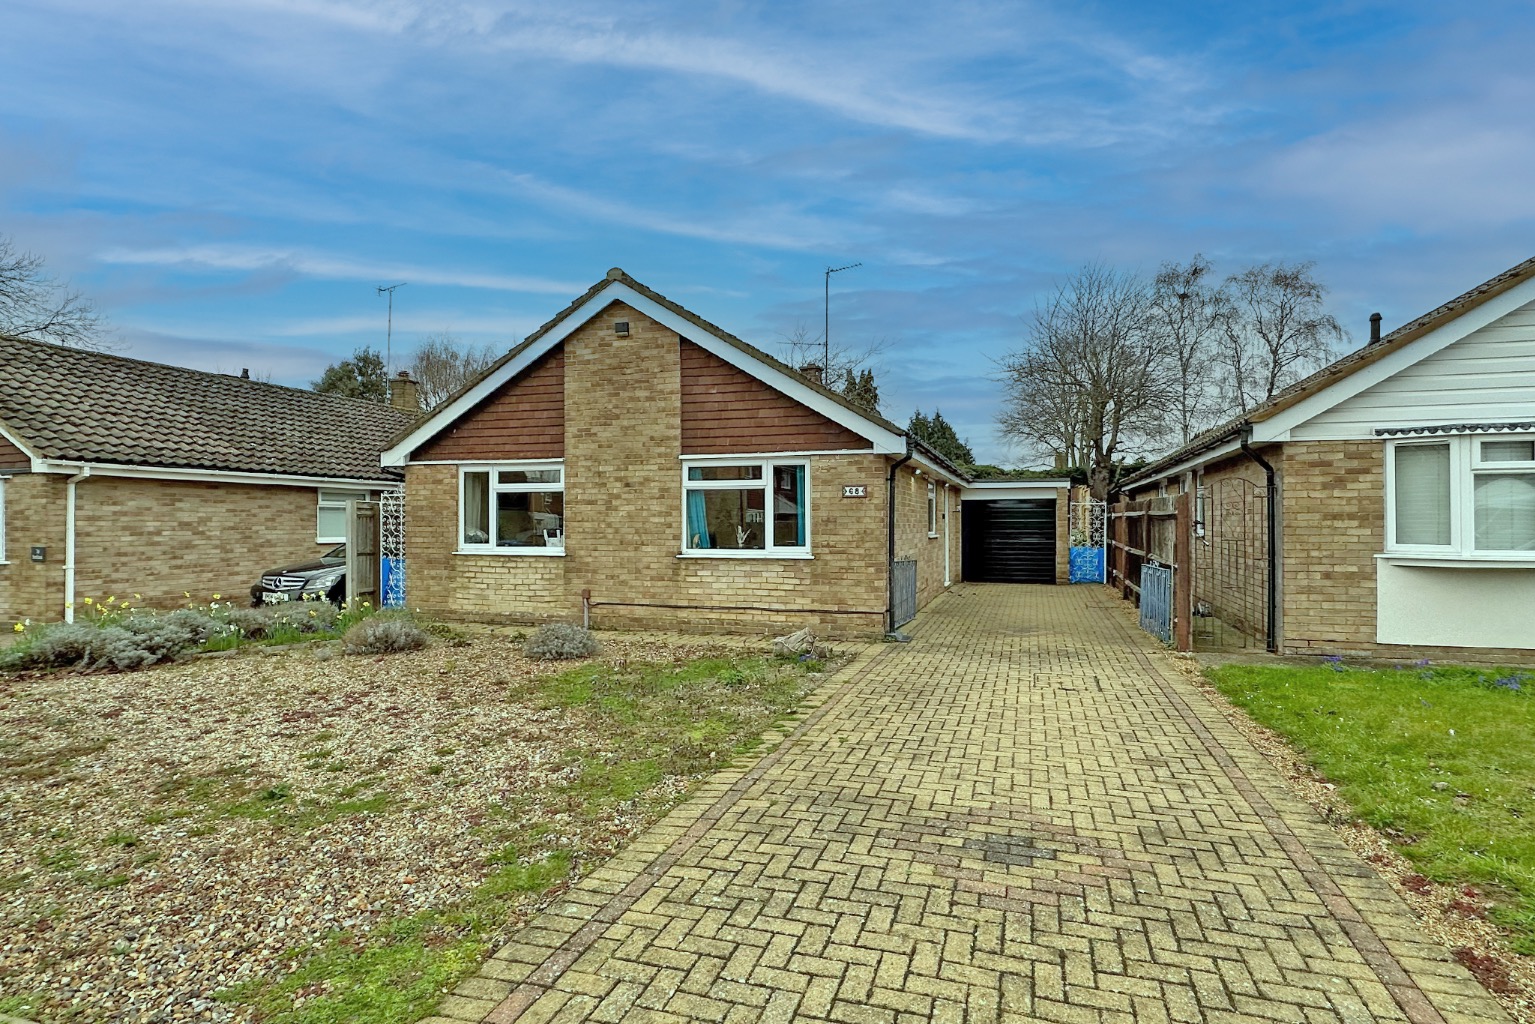 3 bed detached bungalow for sale in Lambourne Drive - Property Image 1